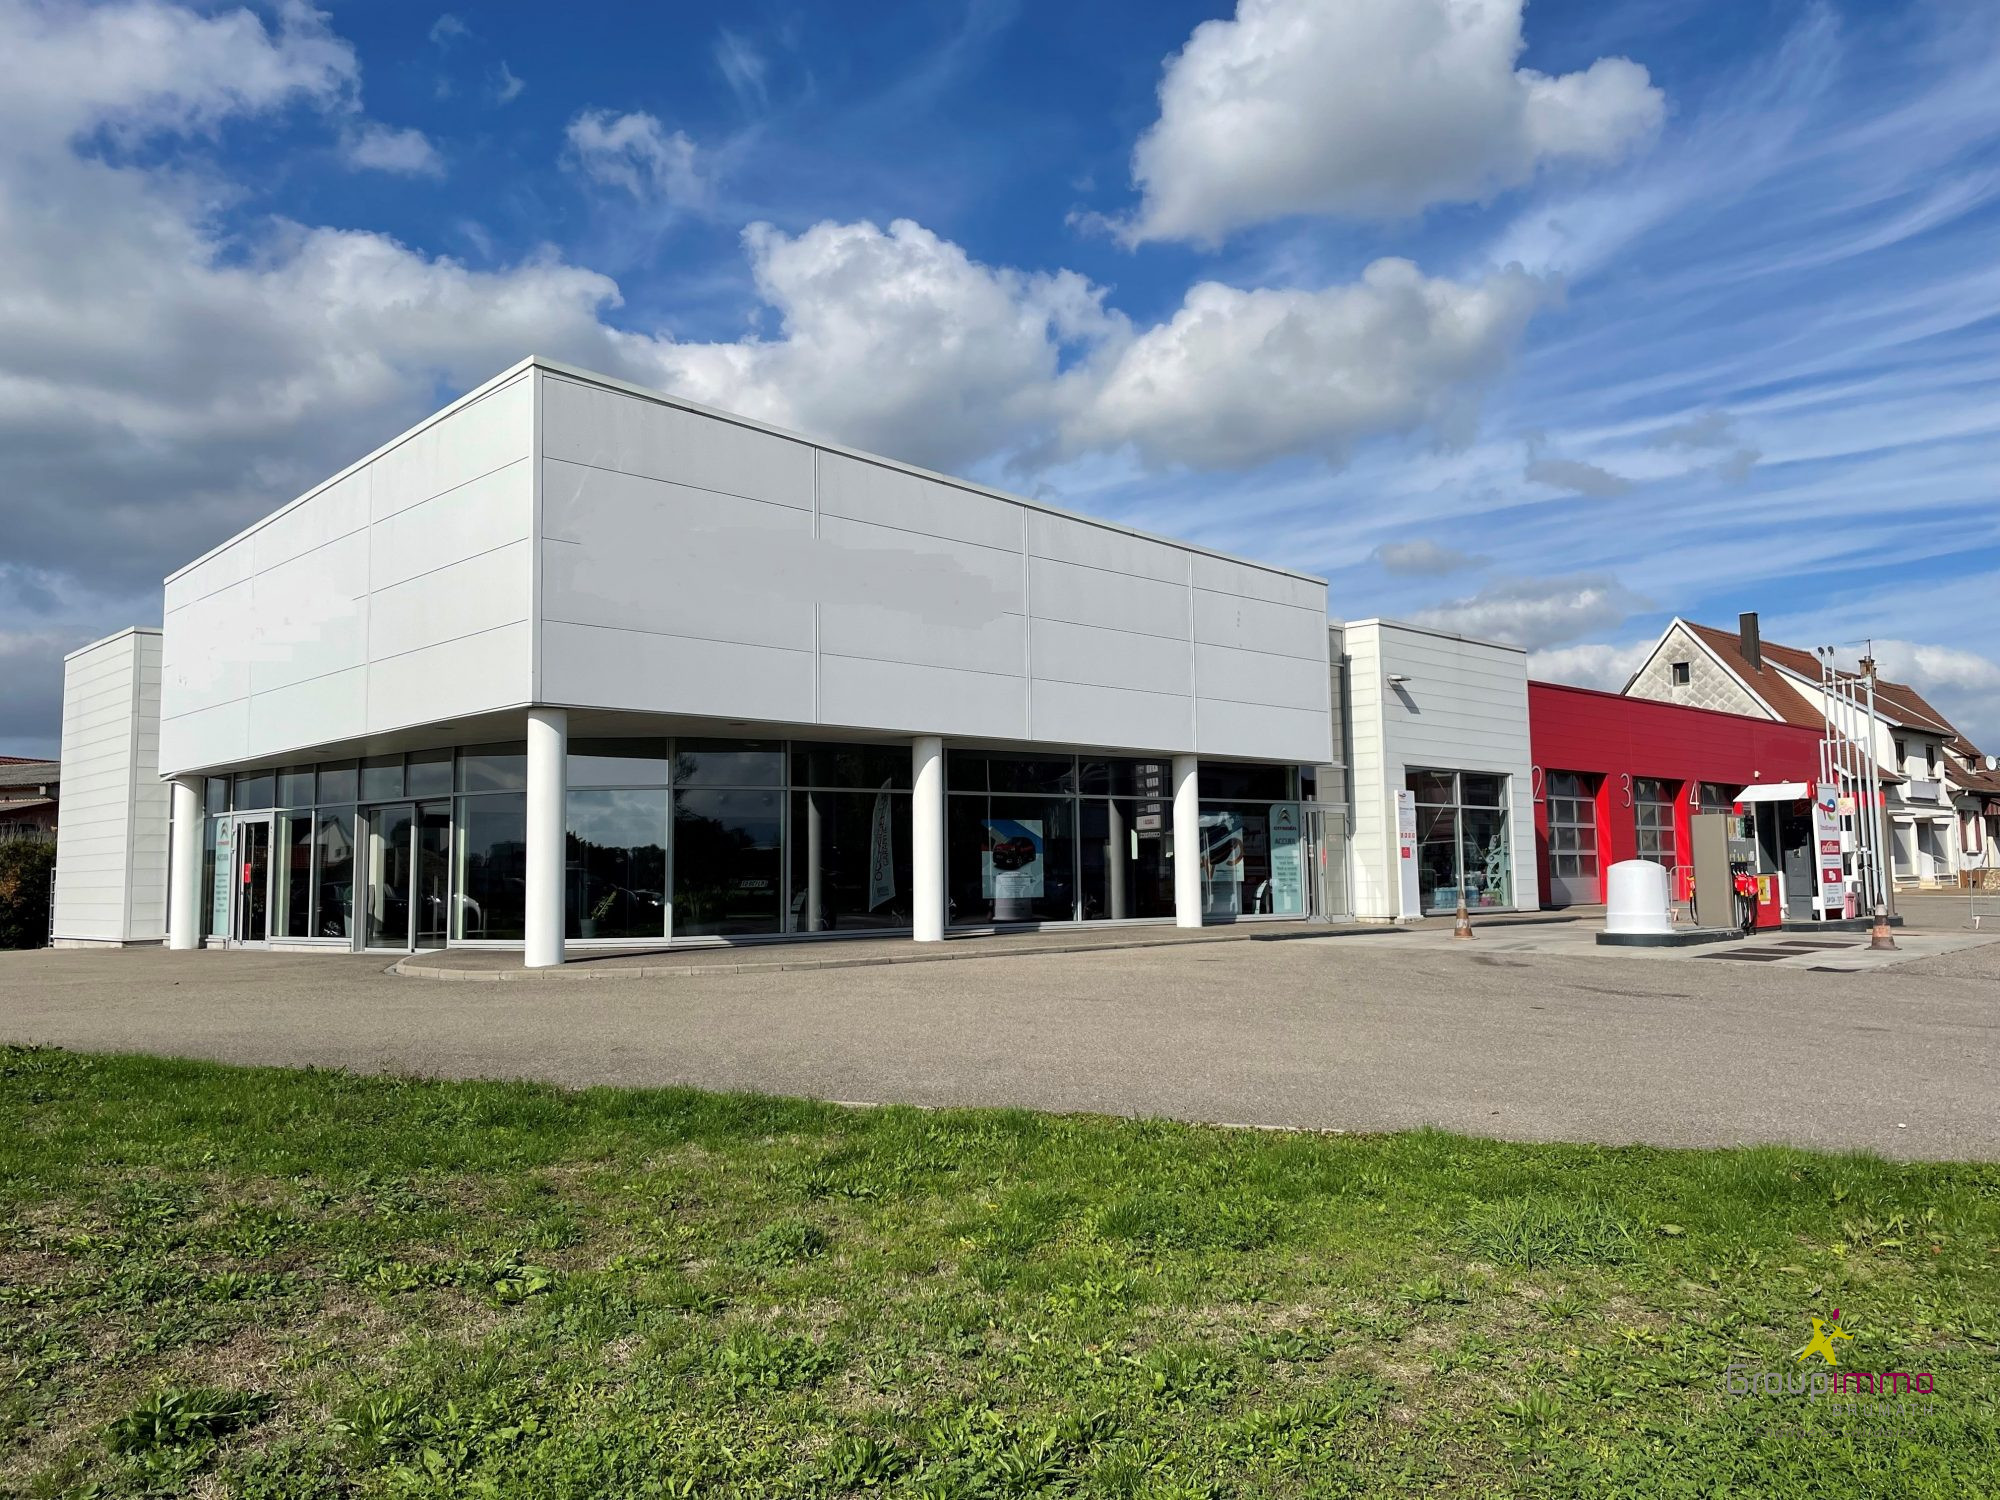 Vente Local Commercial 1300m² à Roeschwoog (67480) - Groupimmo